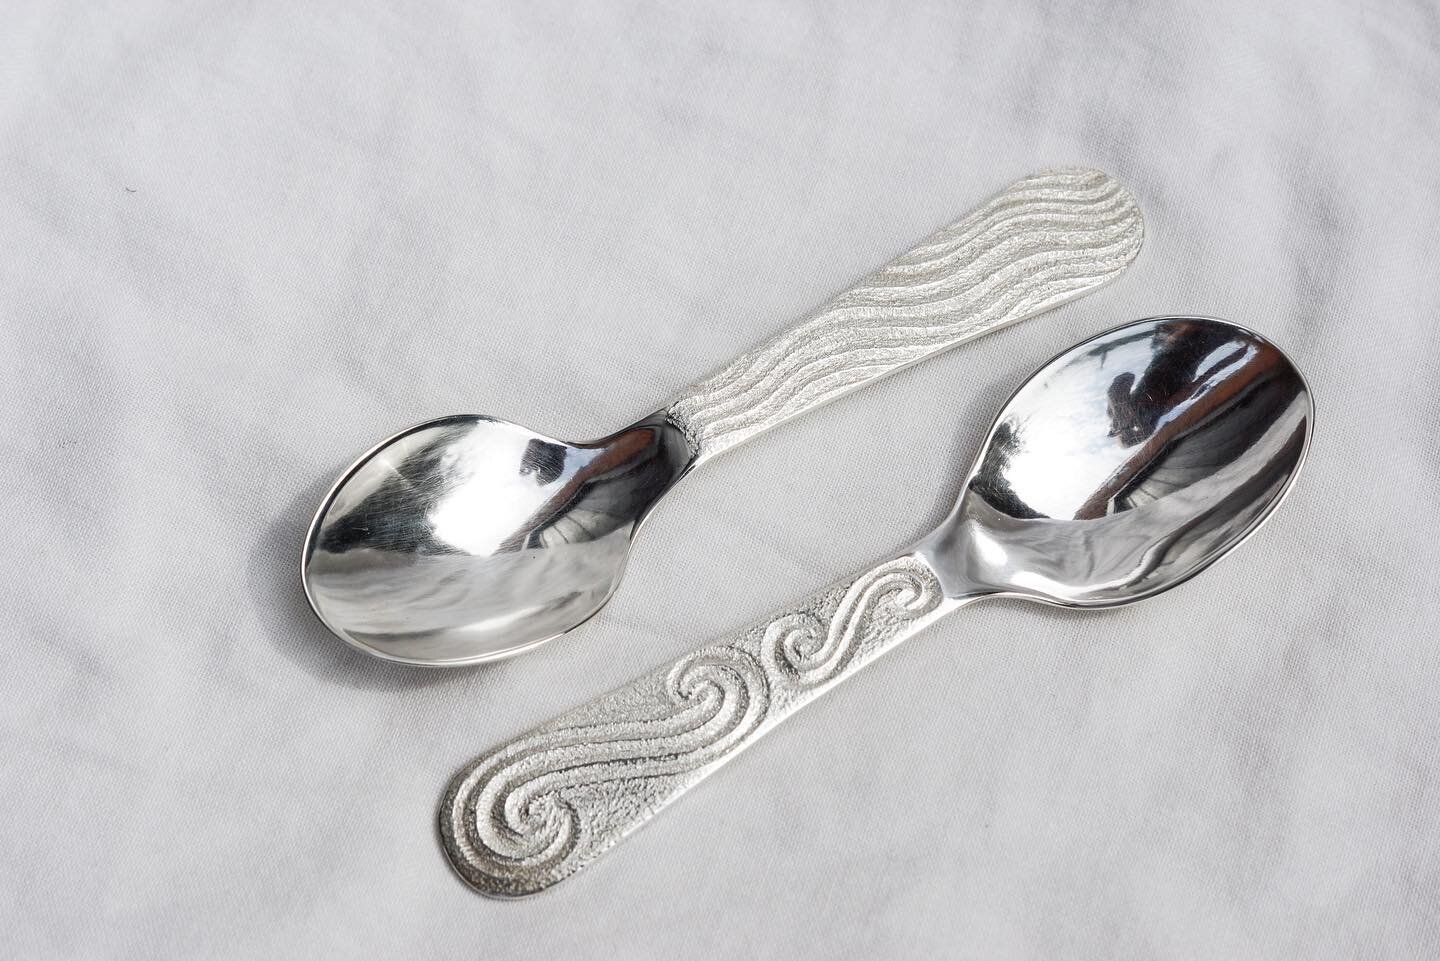 &bull; A recent commission of a silver spoon inspired me to make two ~  They have been chased with a swirling wave design &bull; 
.
.
.
.
.
.
#silverspoon #chased #🥄#chasingwaves #chasingwavescollection #sspjewelleryandsilversmithing #silversmith #h